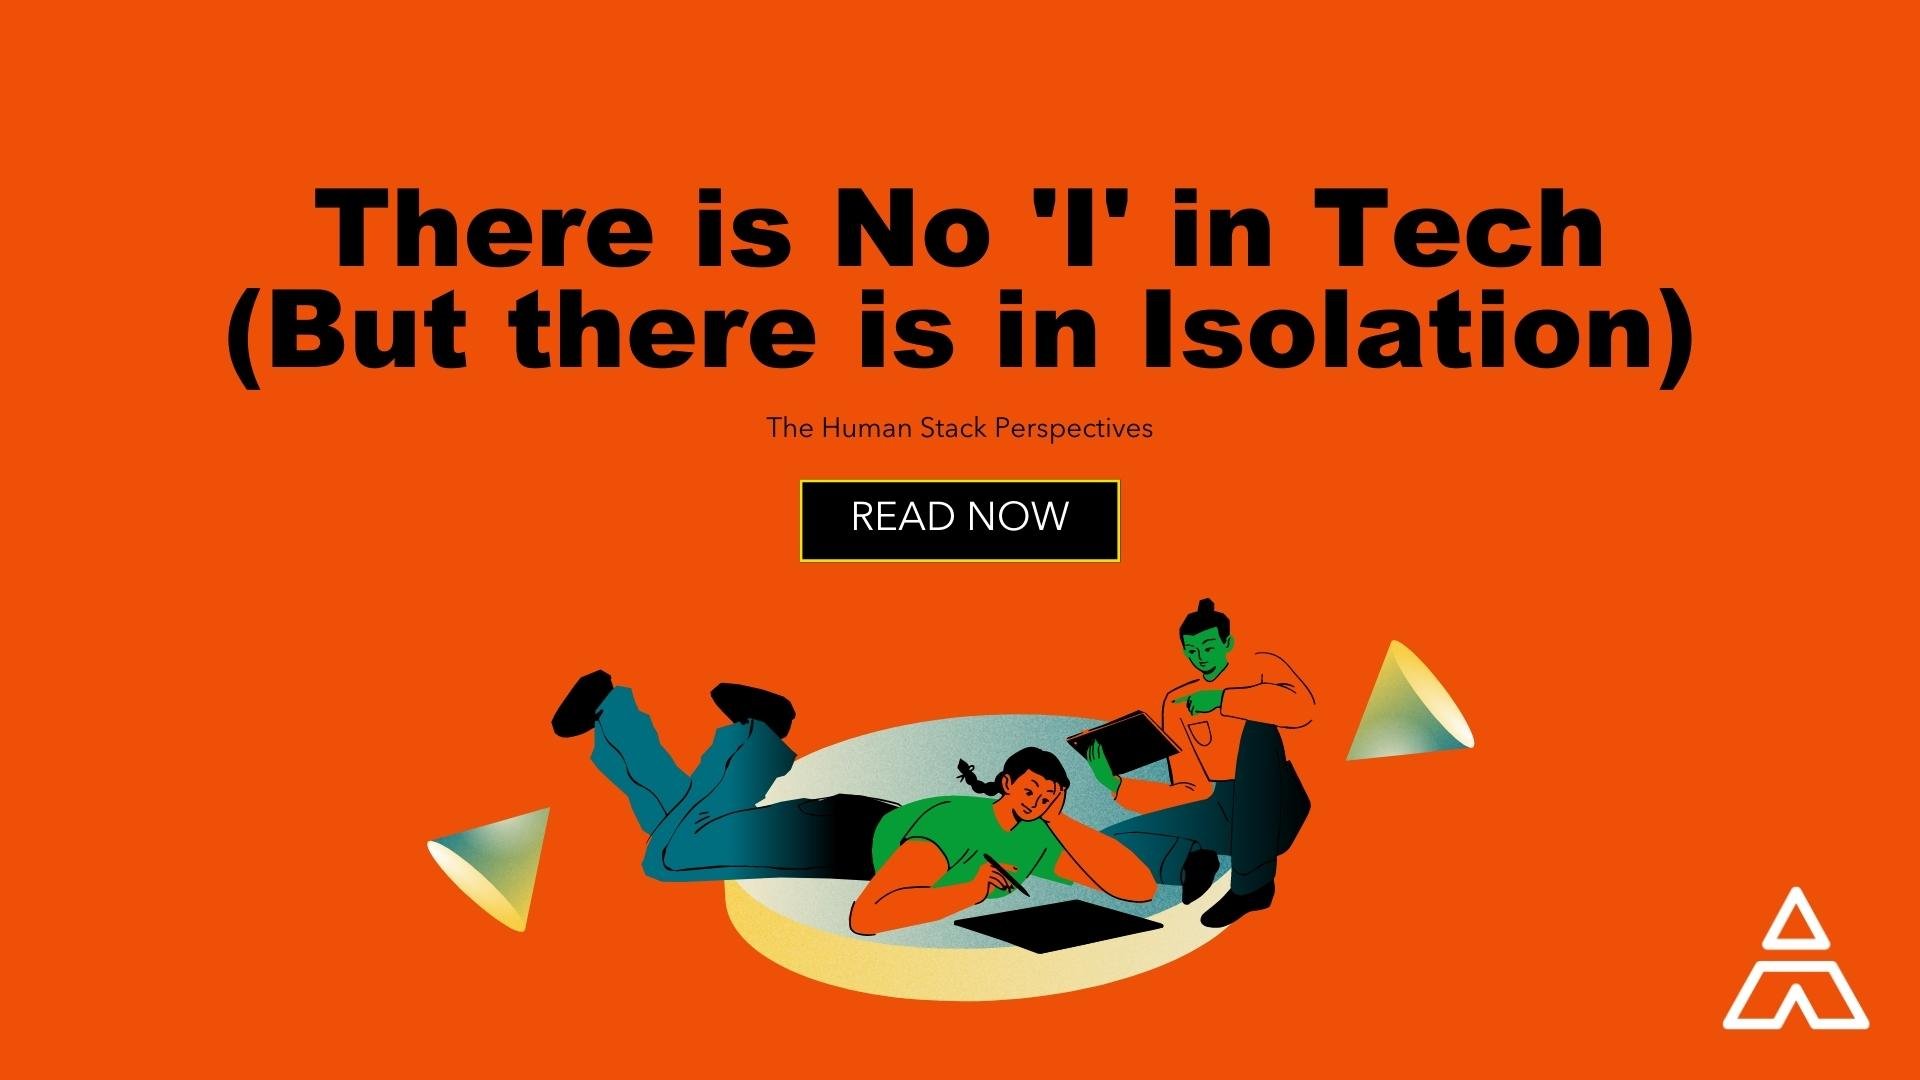 There is no 'I' in tech (but there is in isolation)